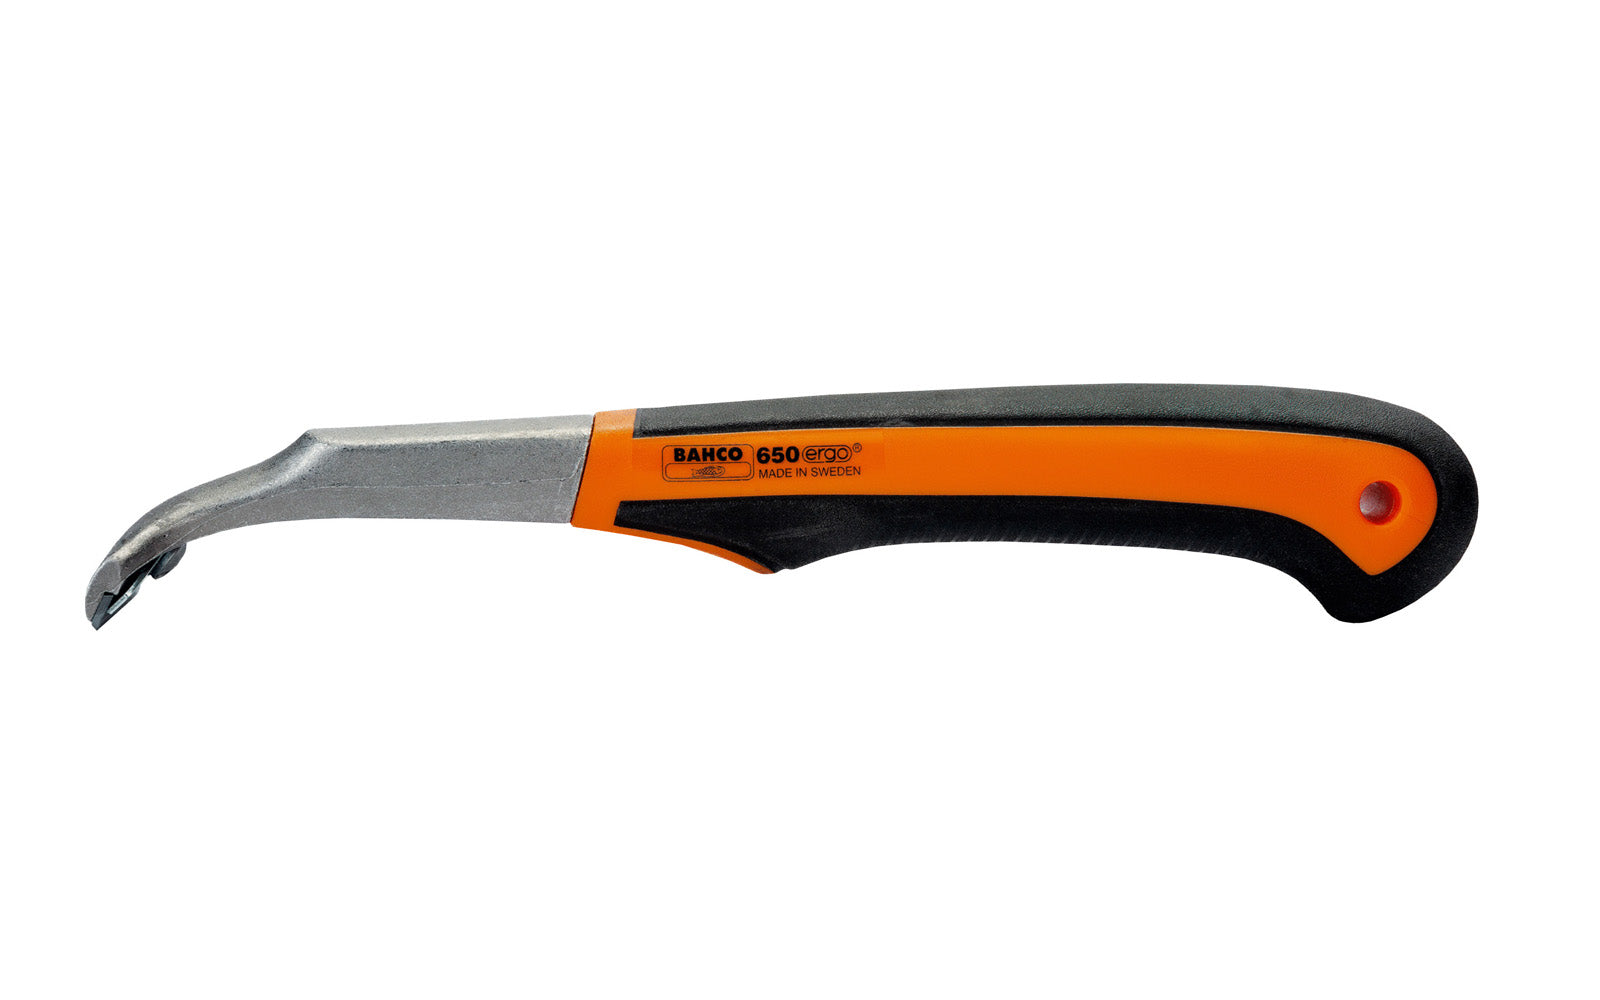 Bahco Ergo Universal Paint Scraper. It's a heavy duty scraper for universal use regardless of scraping direction. Two-component handle provides ample space to scrape with both hands, better grip and excellent working comfort. Supplied with 442, 50mm double edged straight carbide blade. 7311518221591. Made in Sweden.